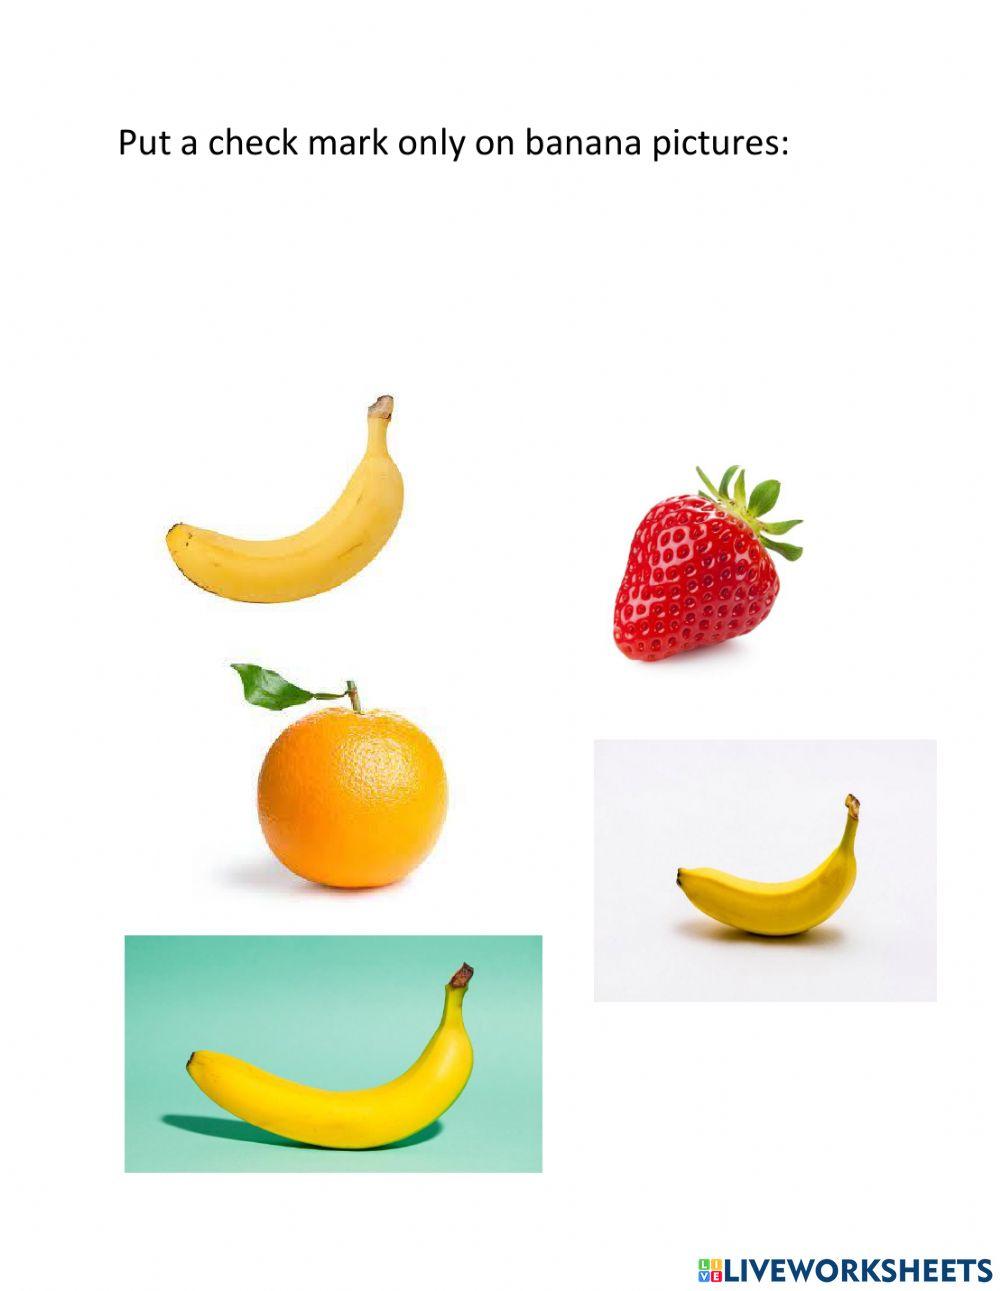 Tick yes for Banana pictures